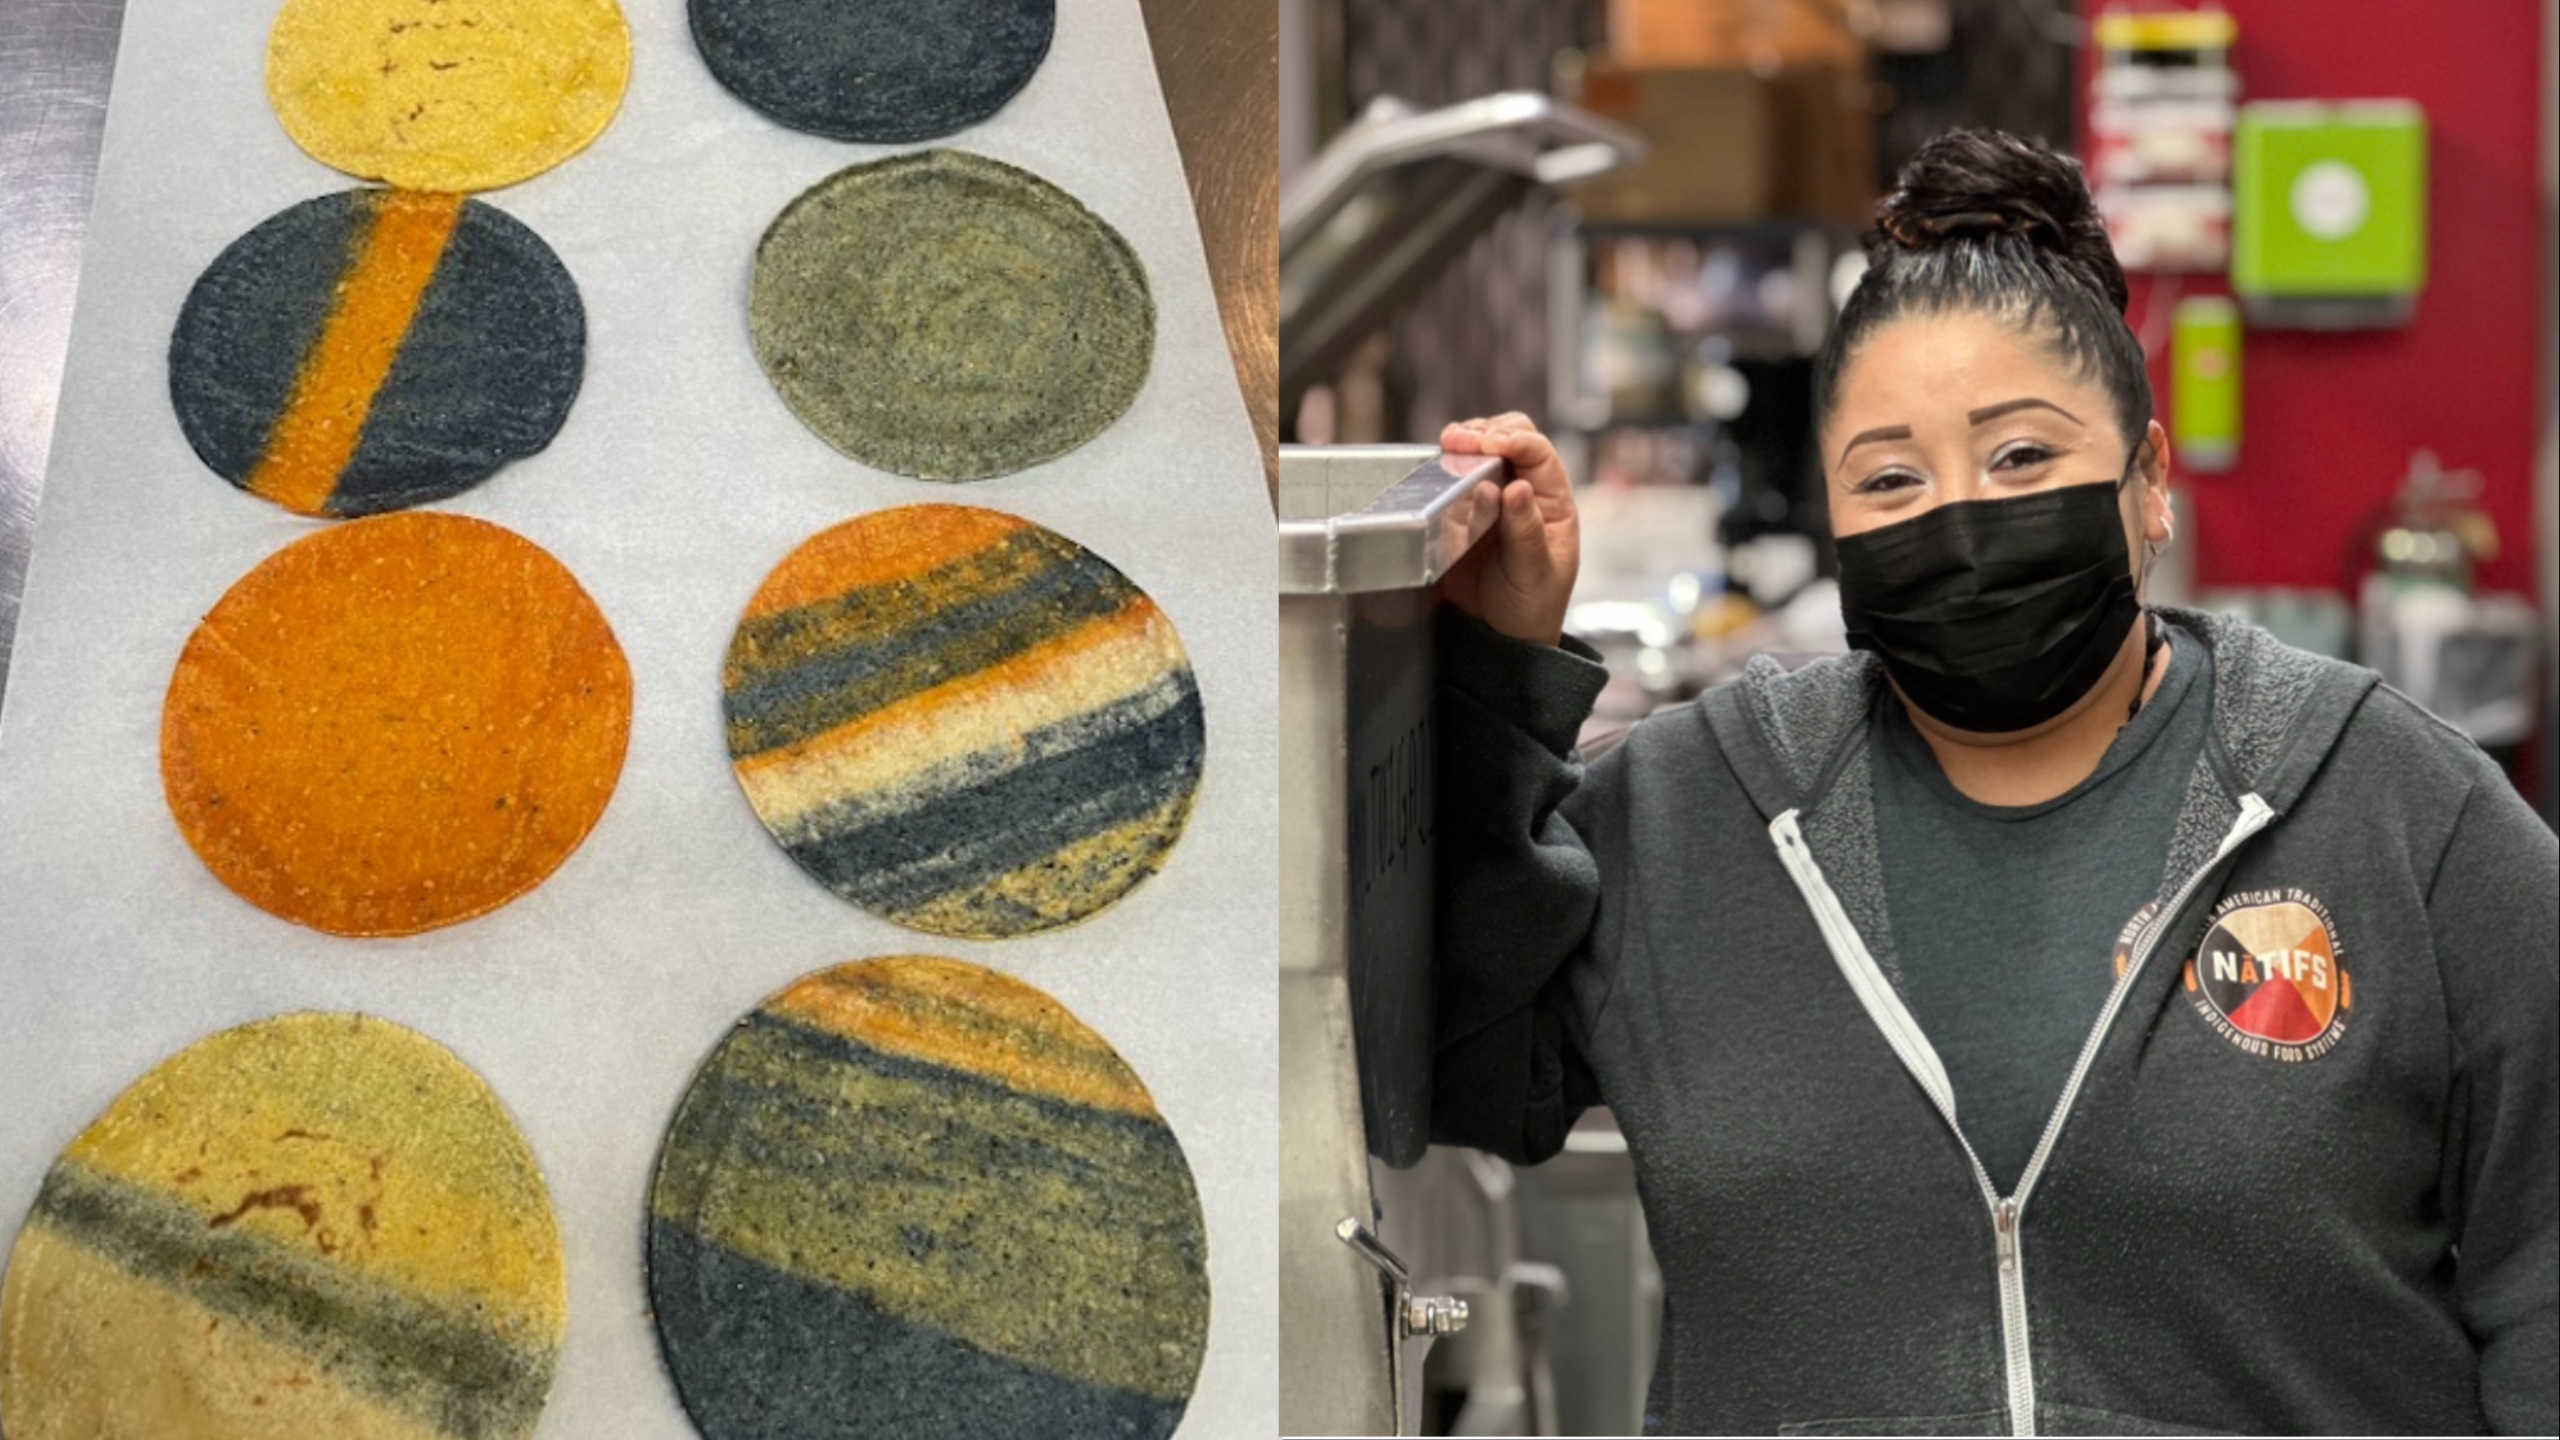 left: eight colorful tortillas—red, blue, and yellow—sit on a piece of parchment paper. Right: A woman stands next to nixtamalization equipment in a kitchen.